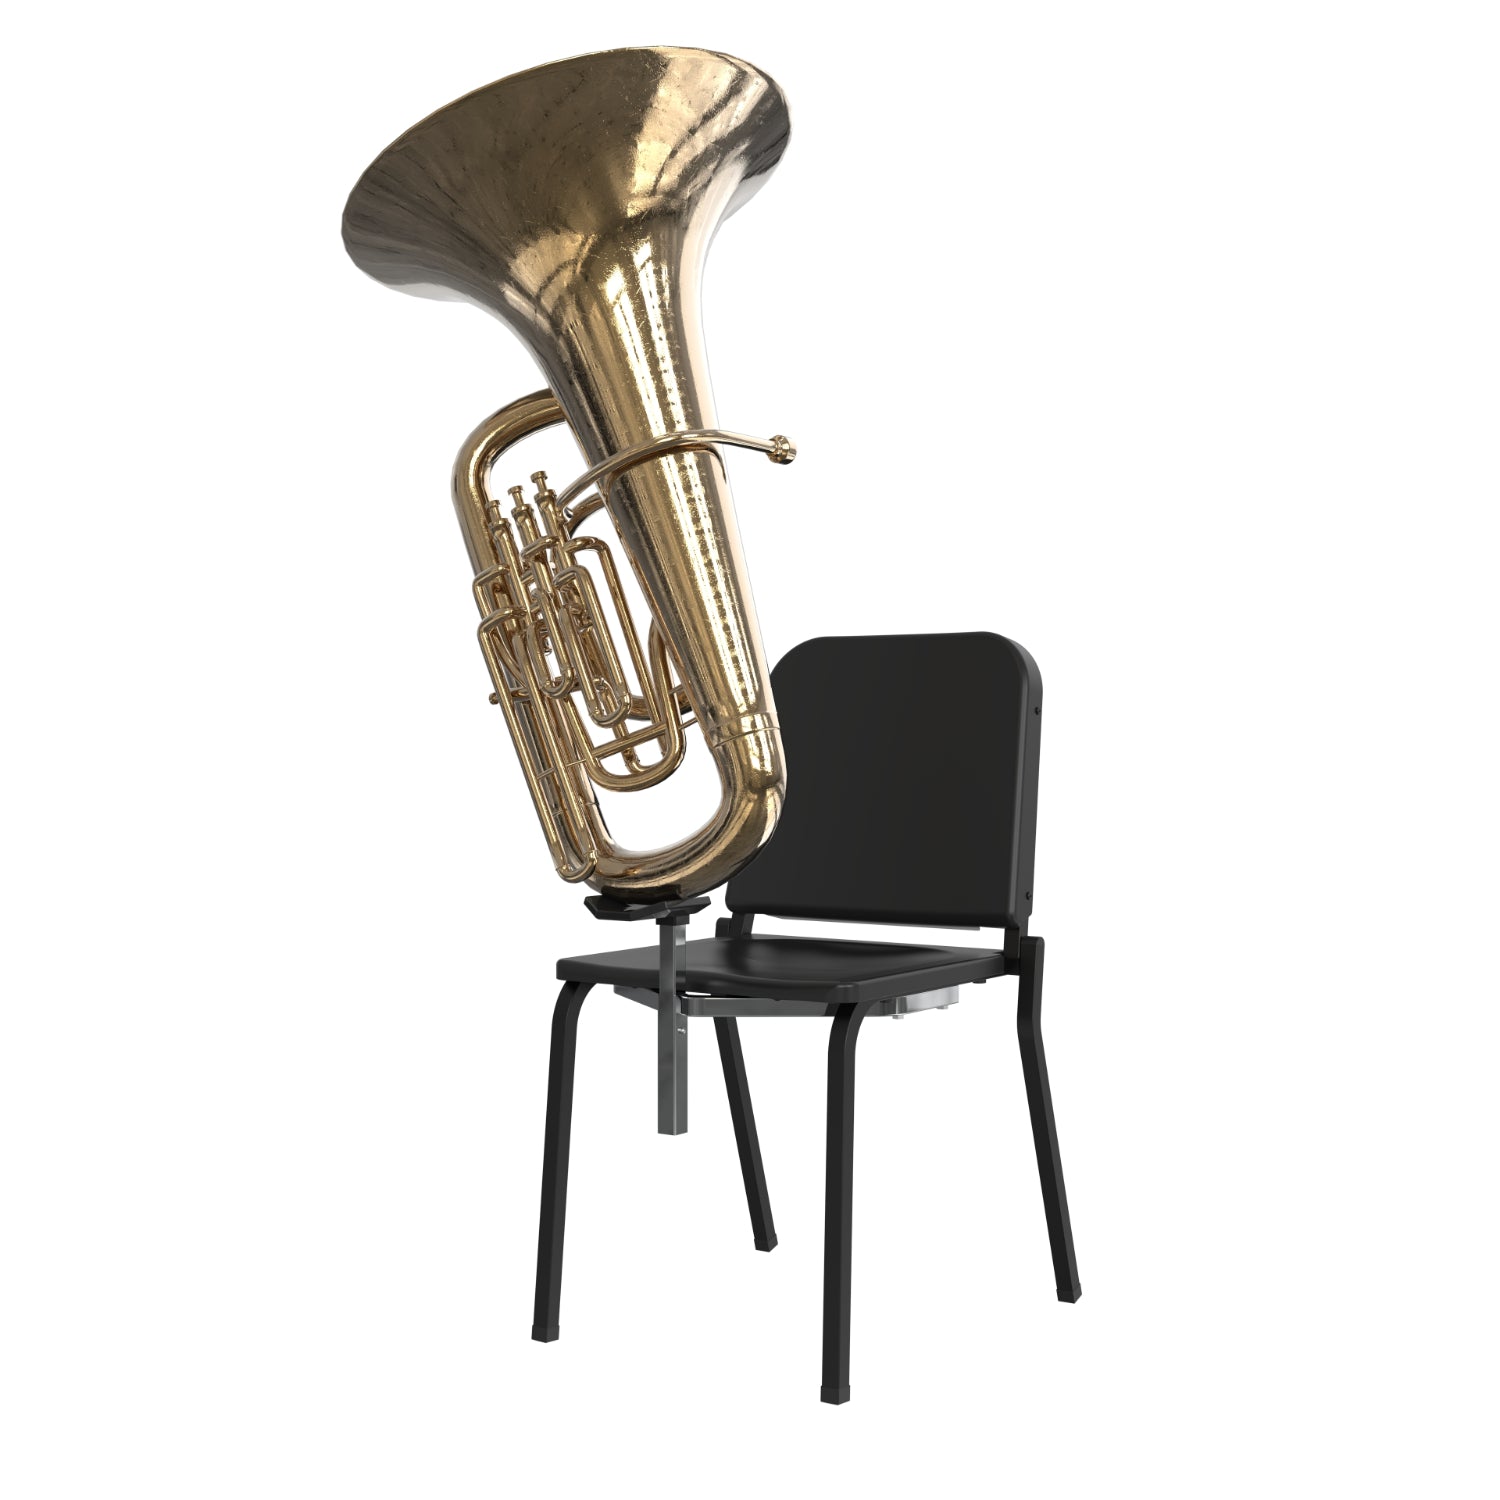 Tuba Rest for Melody Music Chair